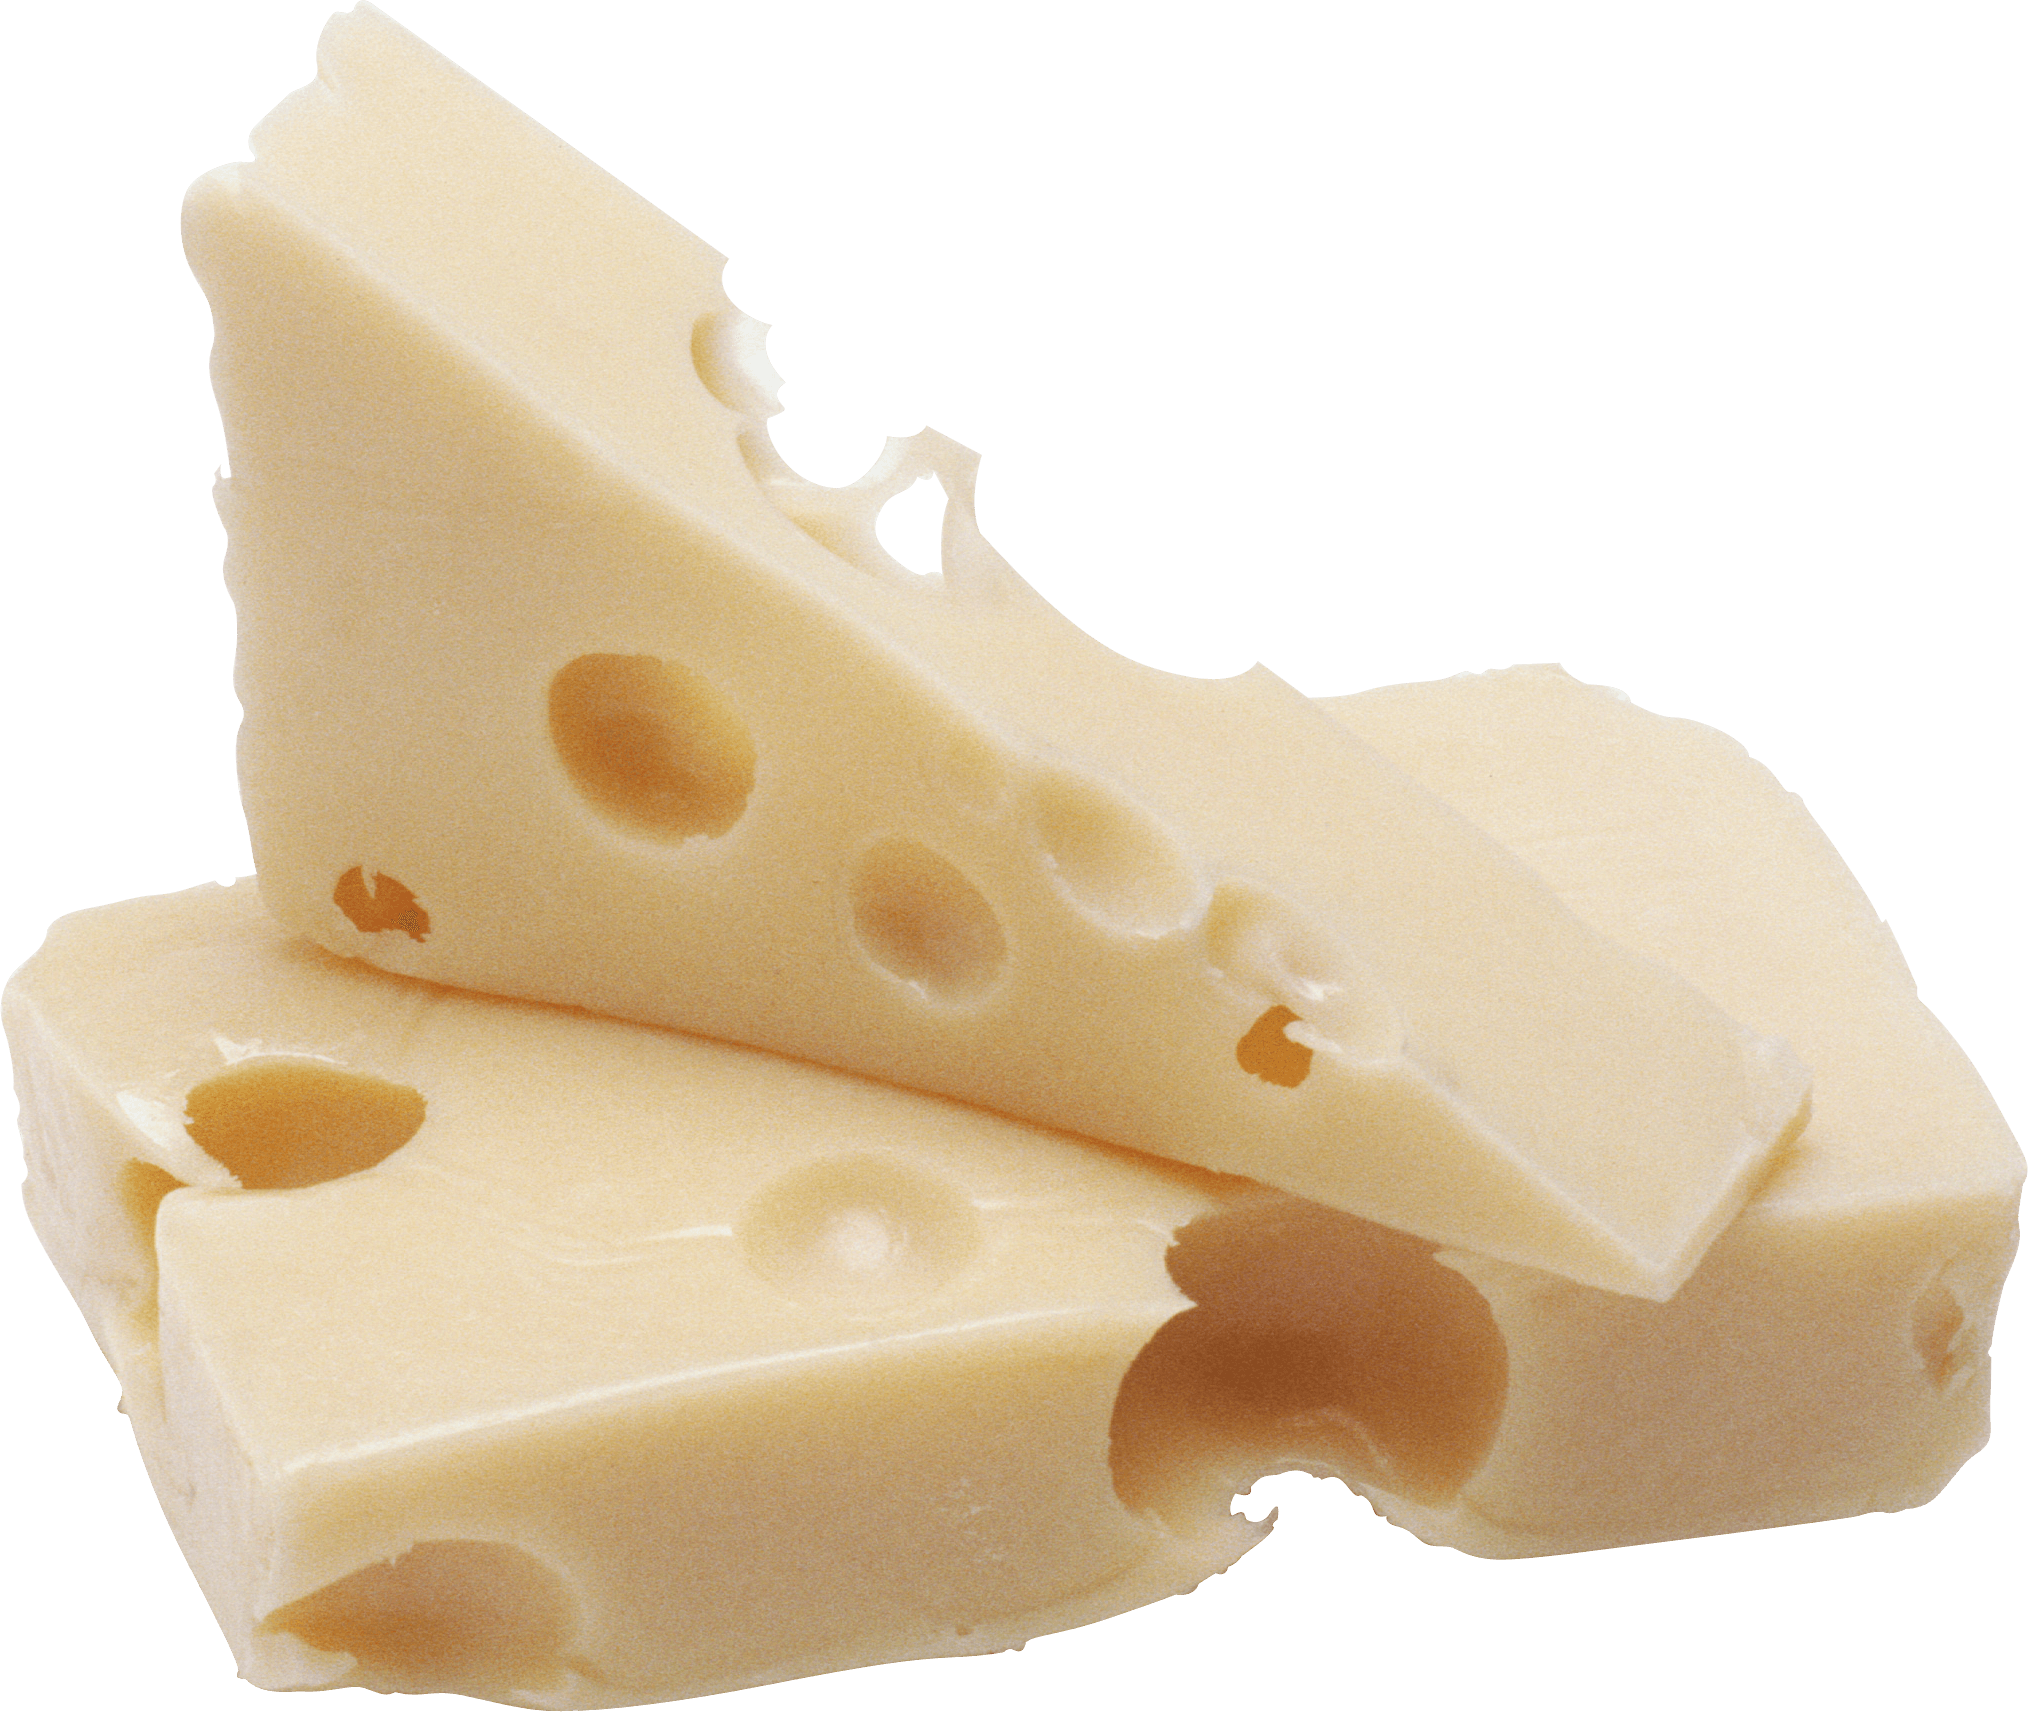 Cheese Png Image PNG Image